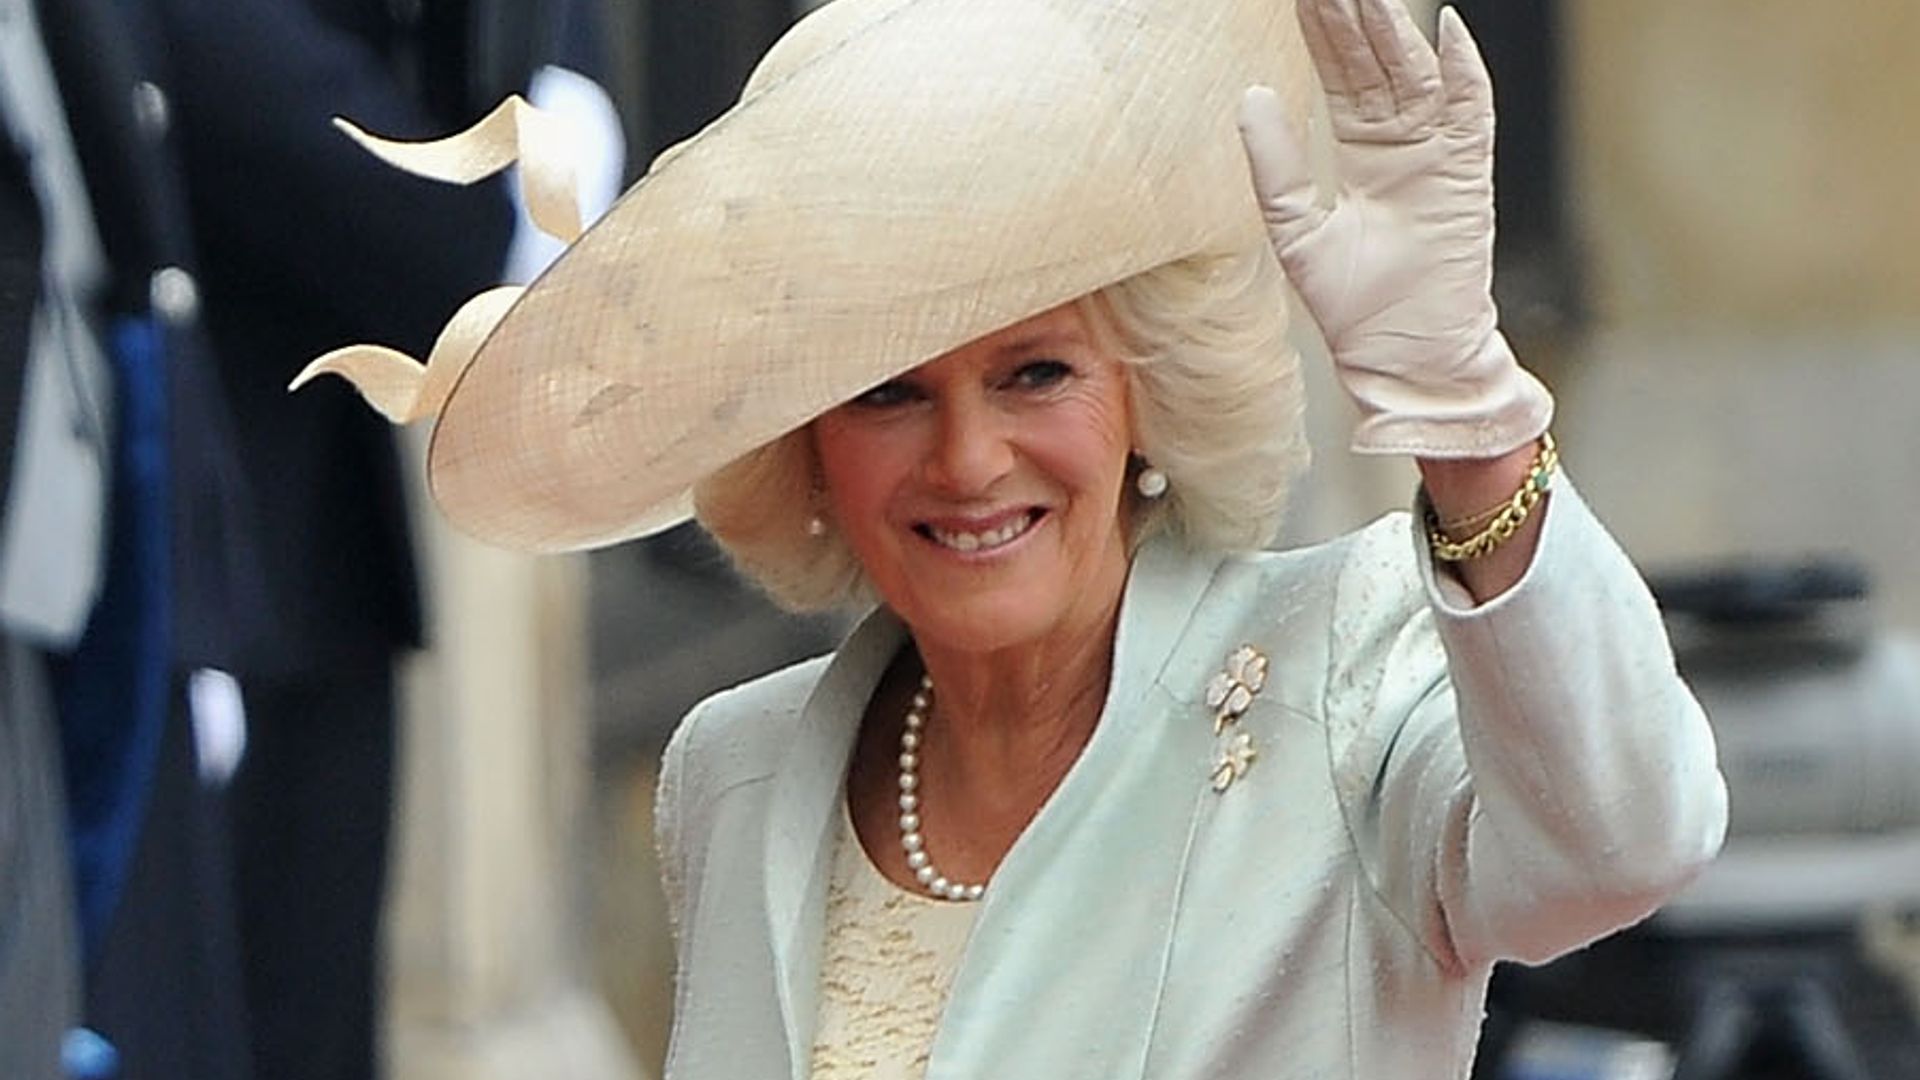 King Charles and Queen Camilla at Prince William's royal wedding in 2011